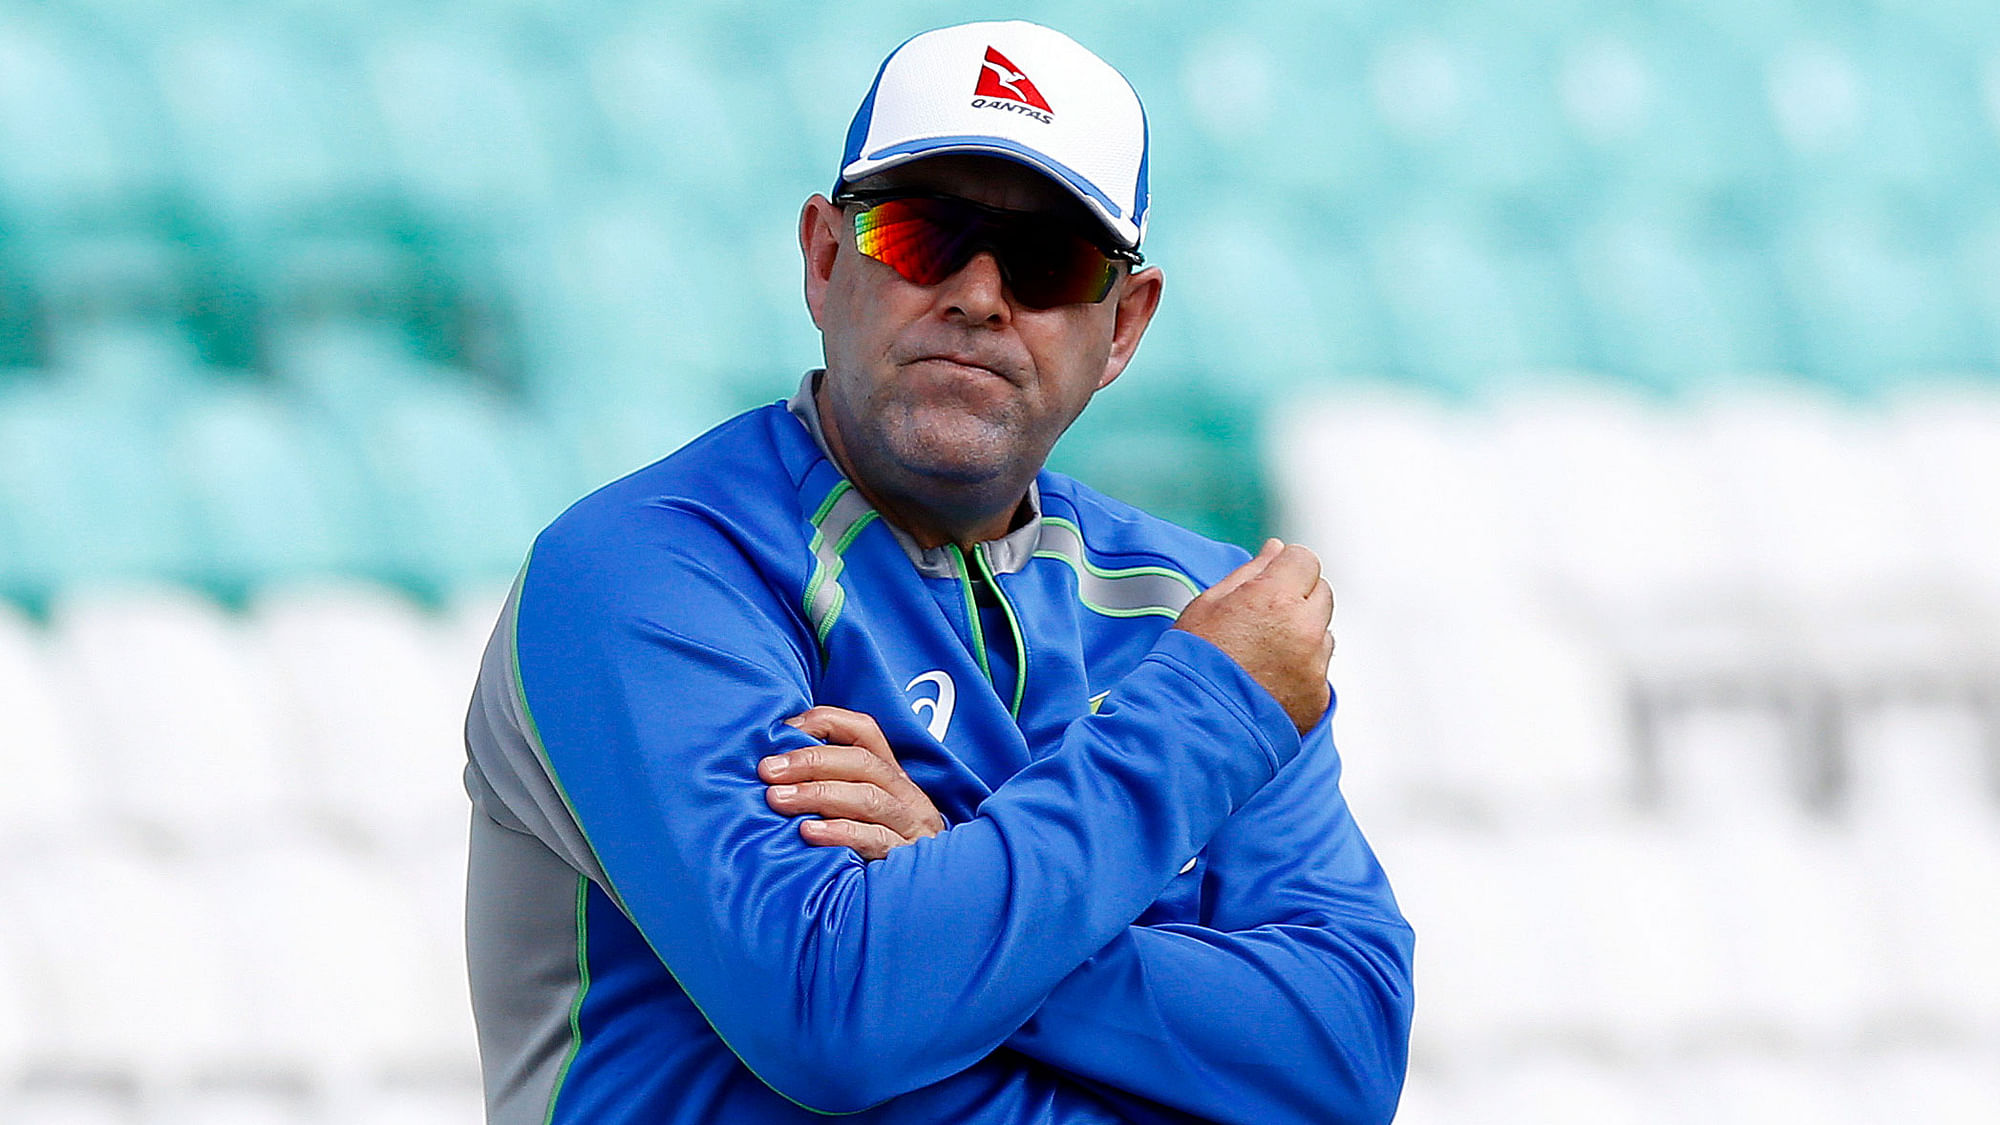 An “excitable character” who wants to win at all times, that’s how former Australian coach Darren Lehmann described Virat Kohli.